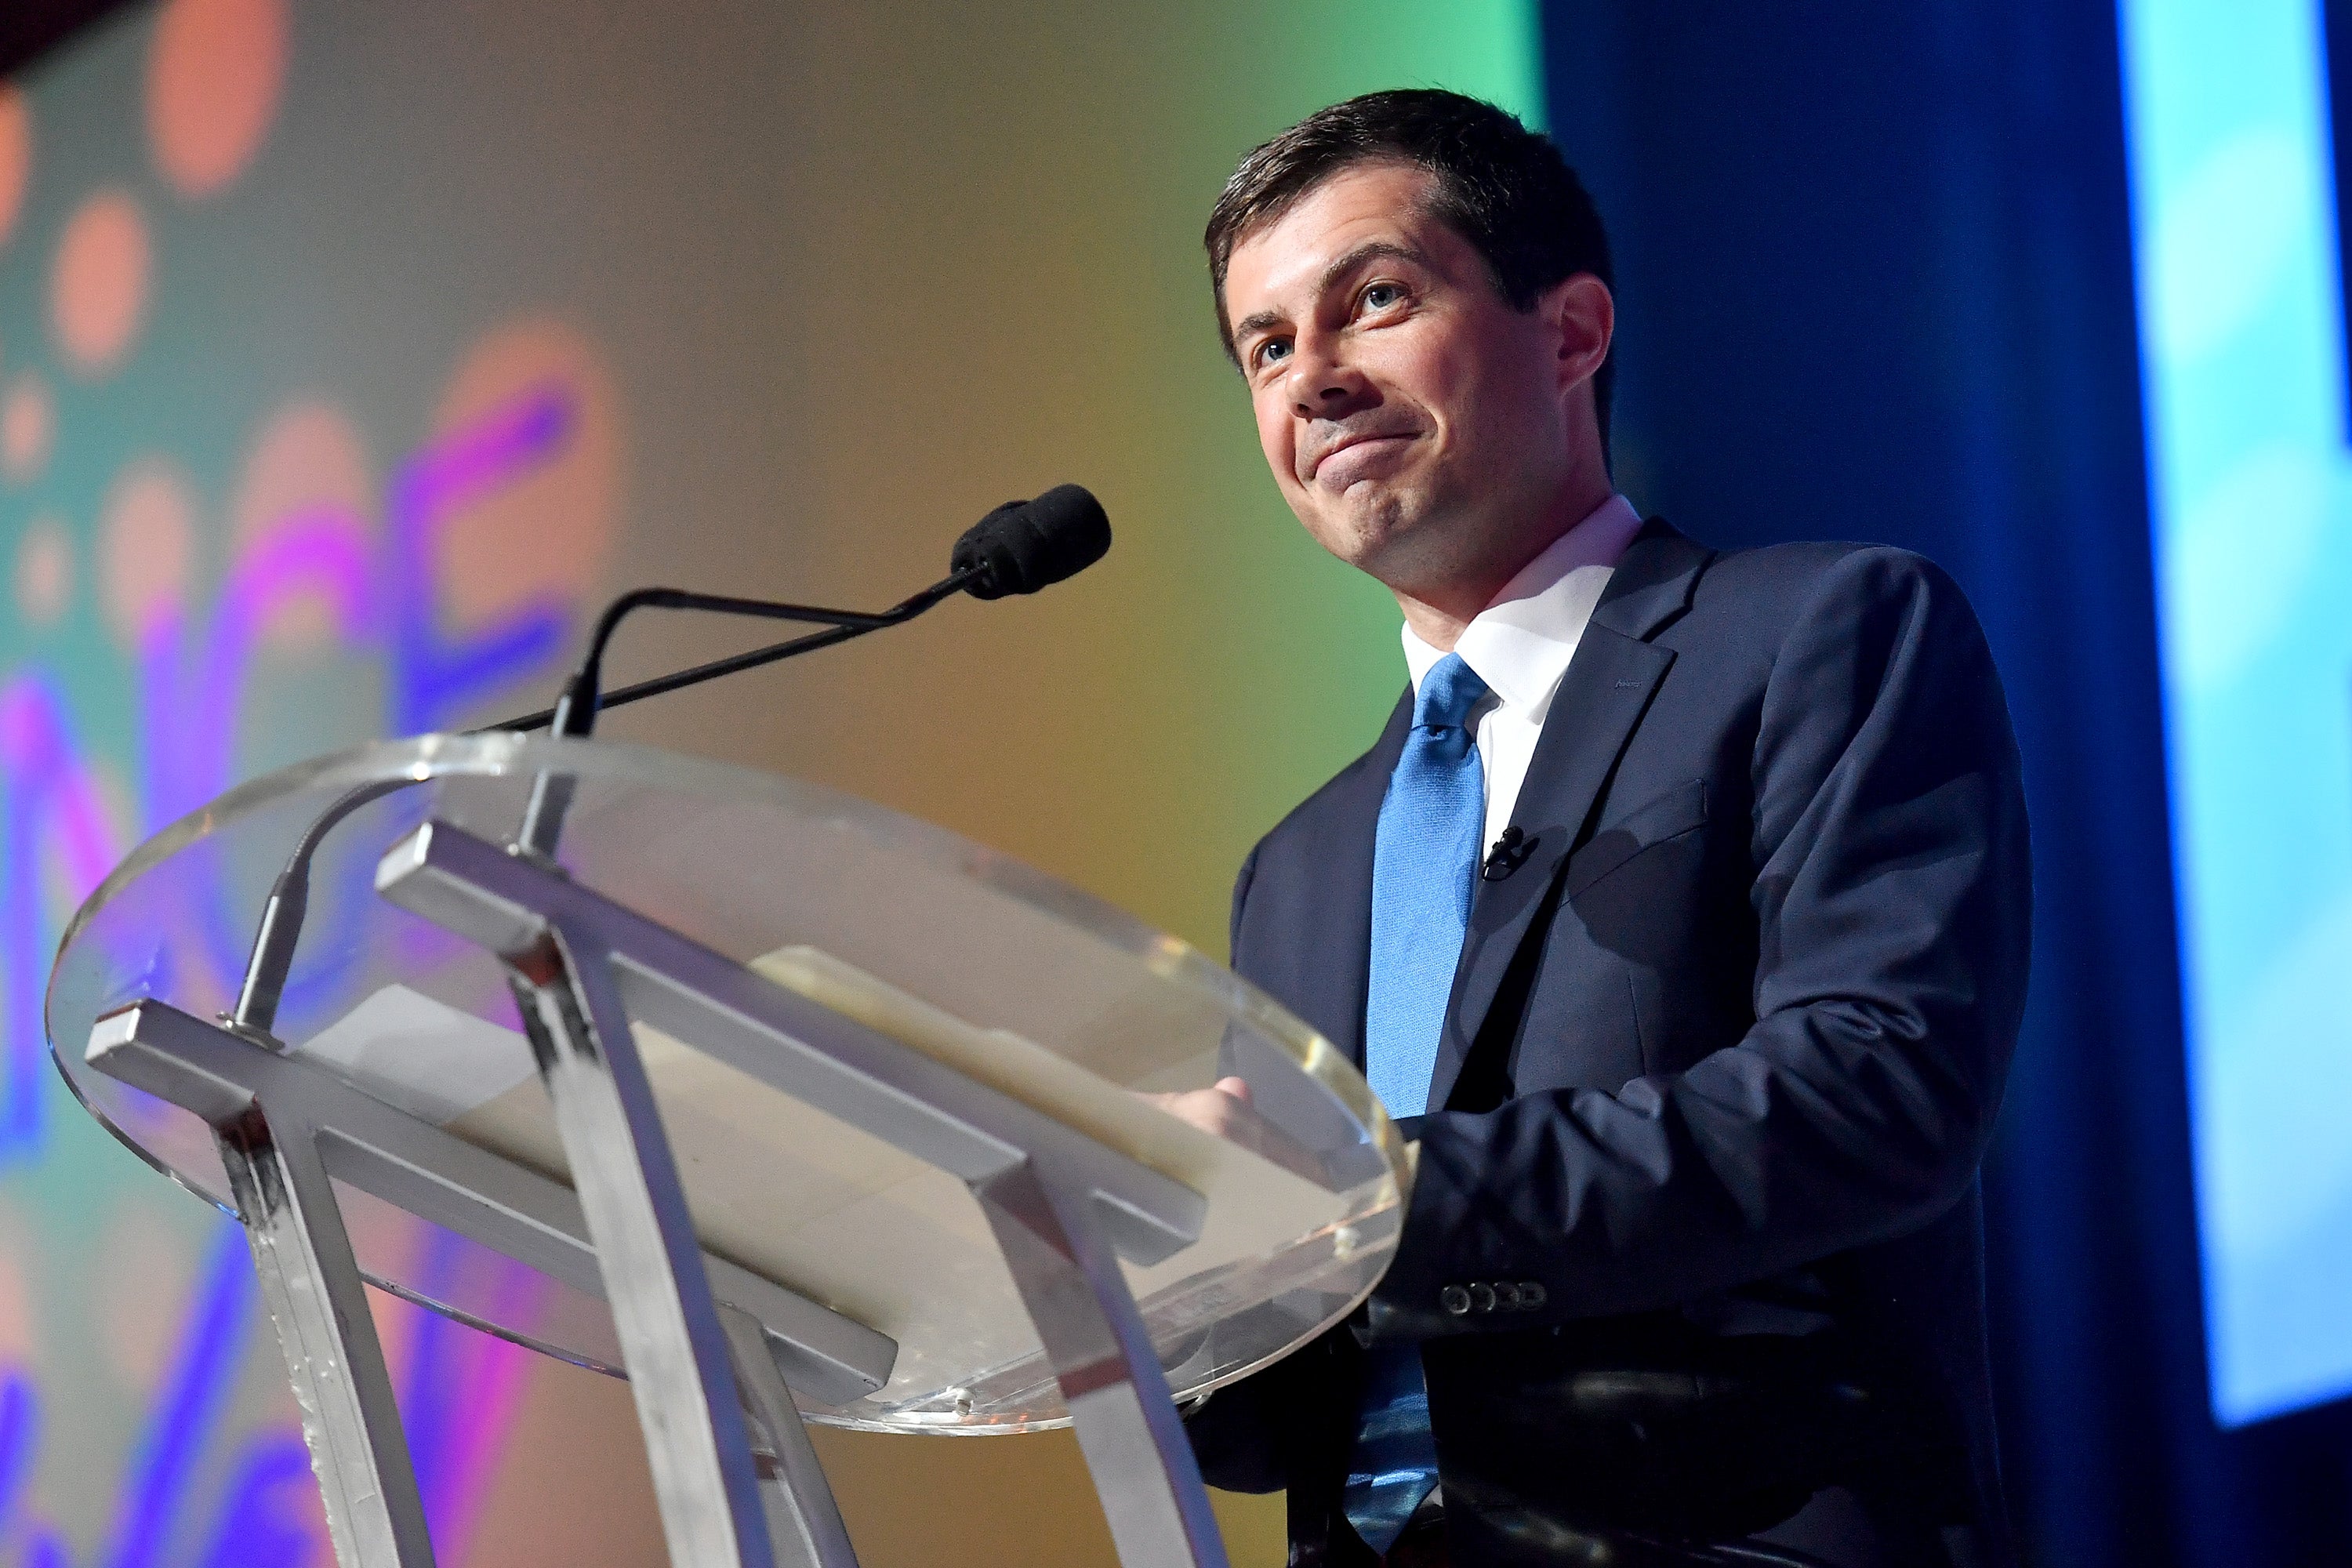 Pete Buttigieg Plans To Tackle Voter Suppression, Climate Change, If Elected President